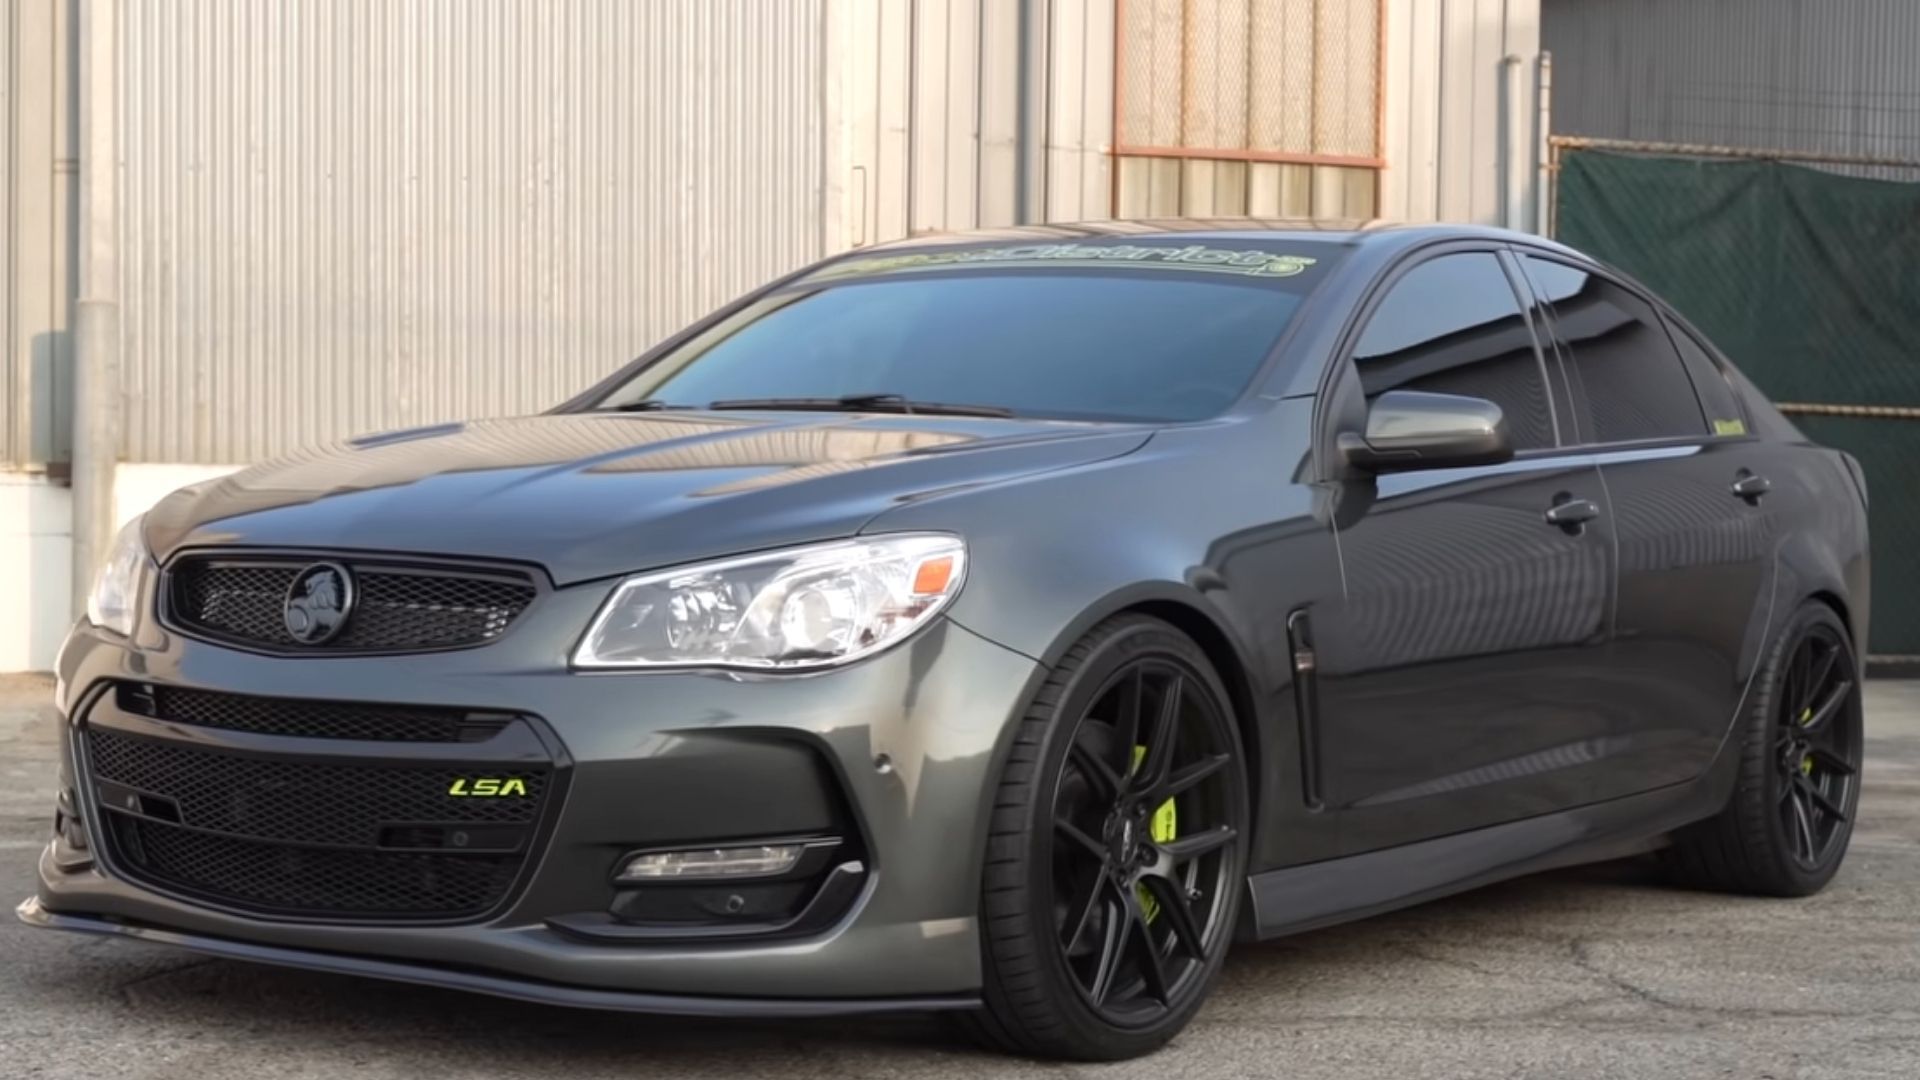 Chevy SS Sedan Comes Supercharged